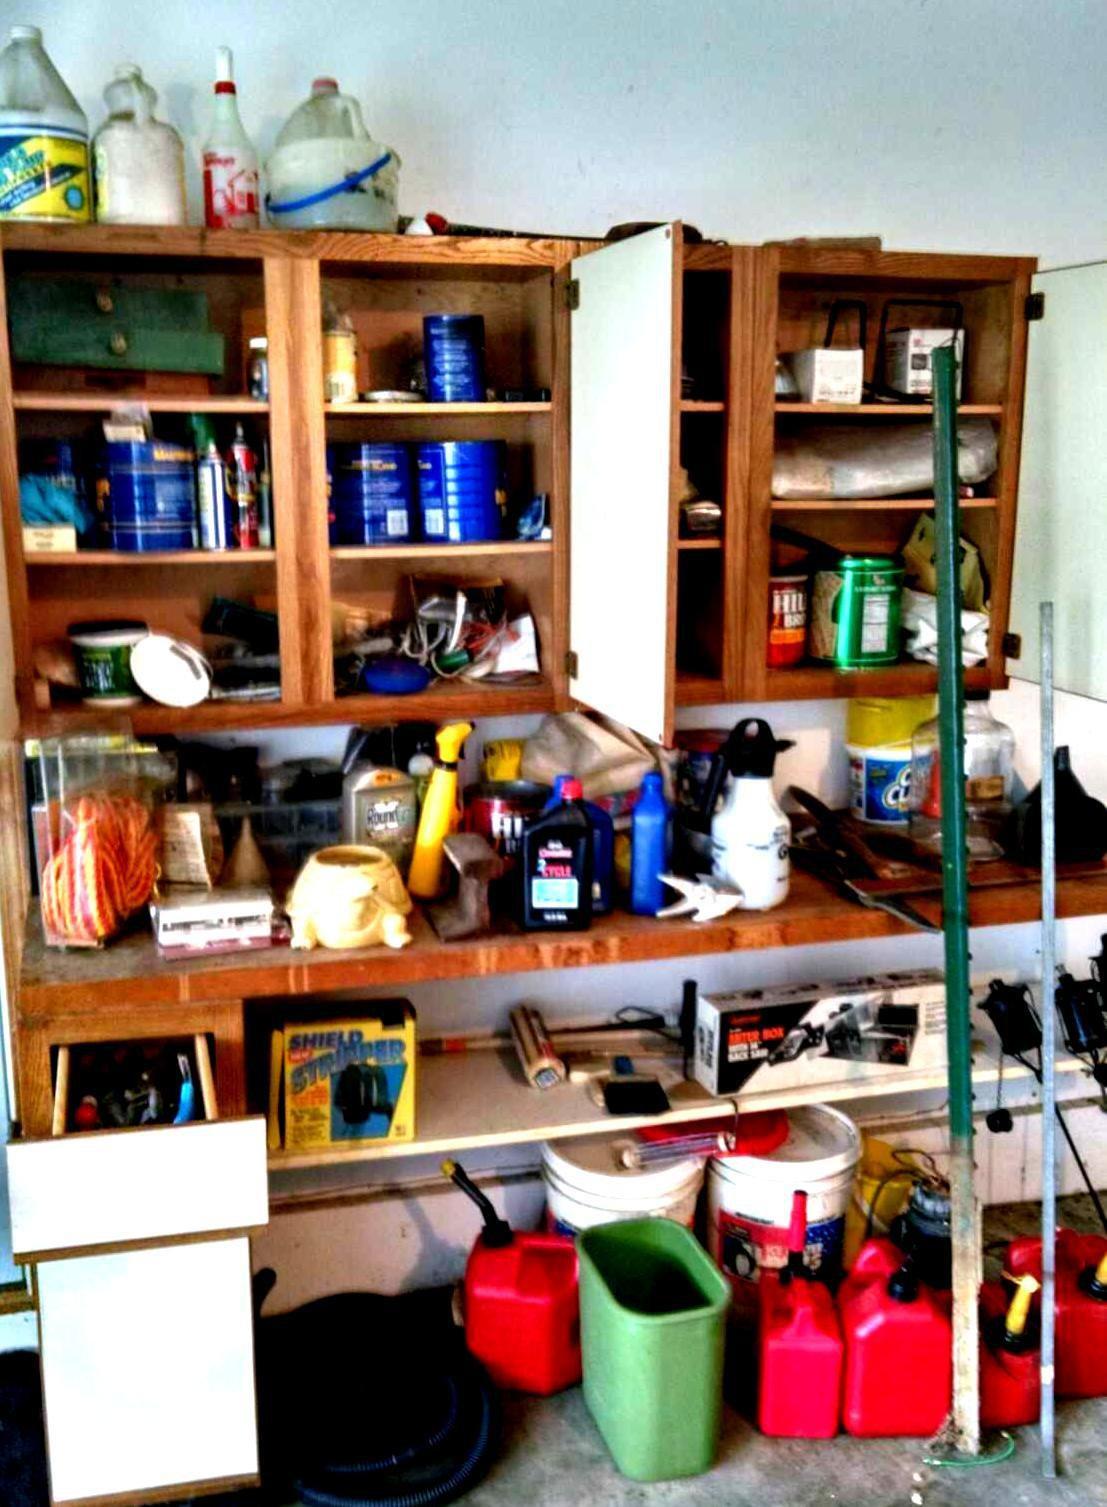 Contents of workbench and cabinets